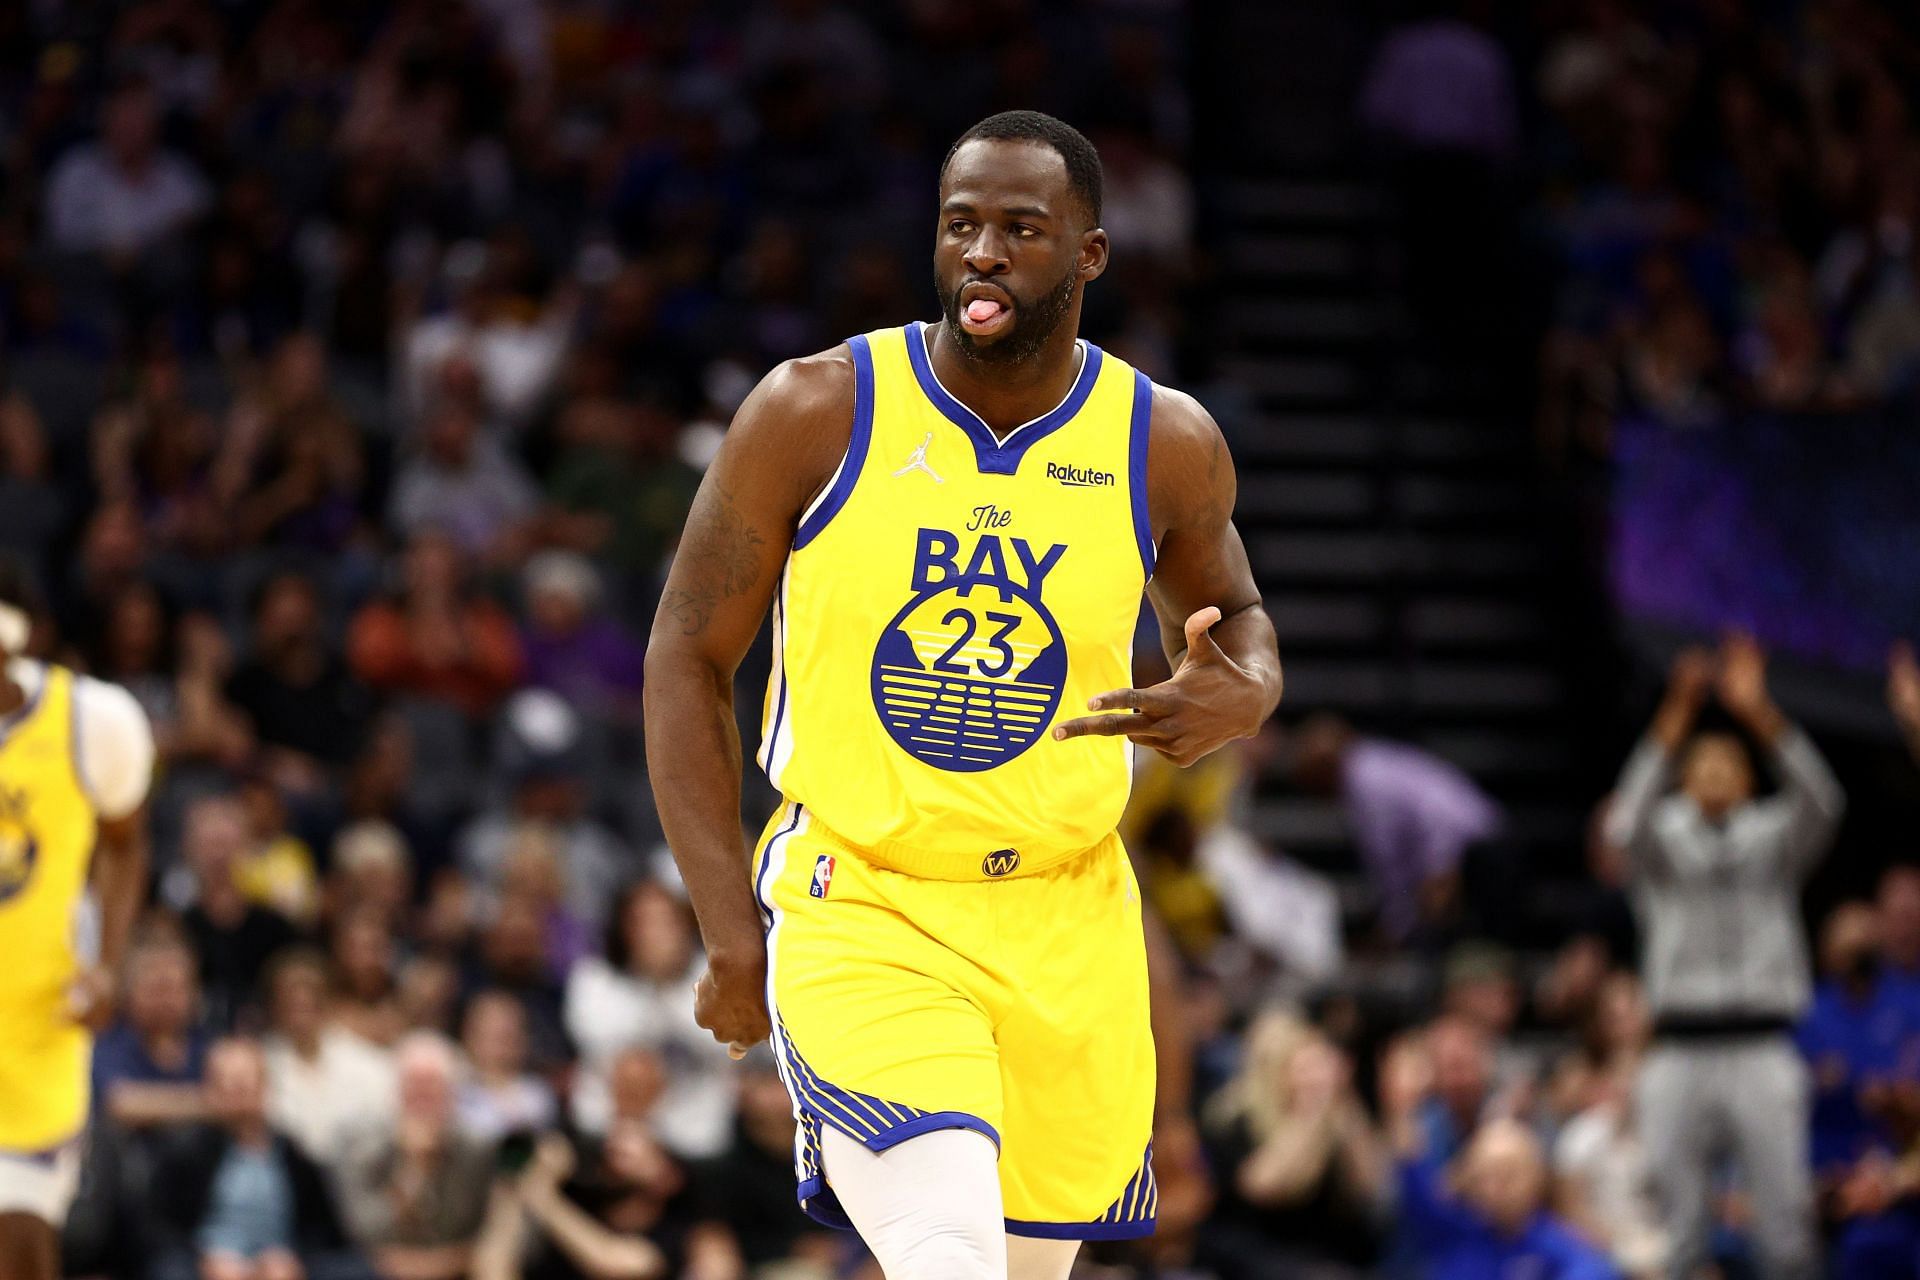 Draymond Green has been a key part of the Golden State Warriors in the last decade.